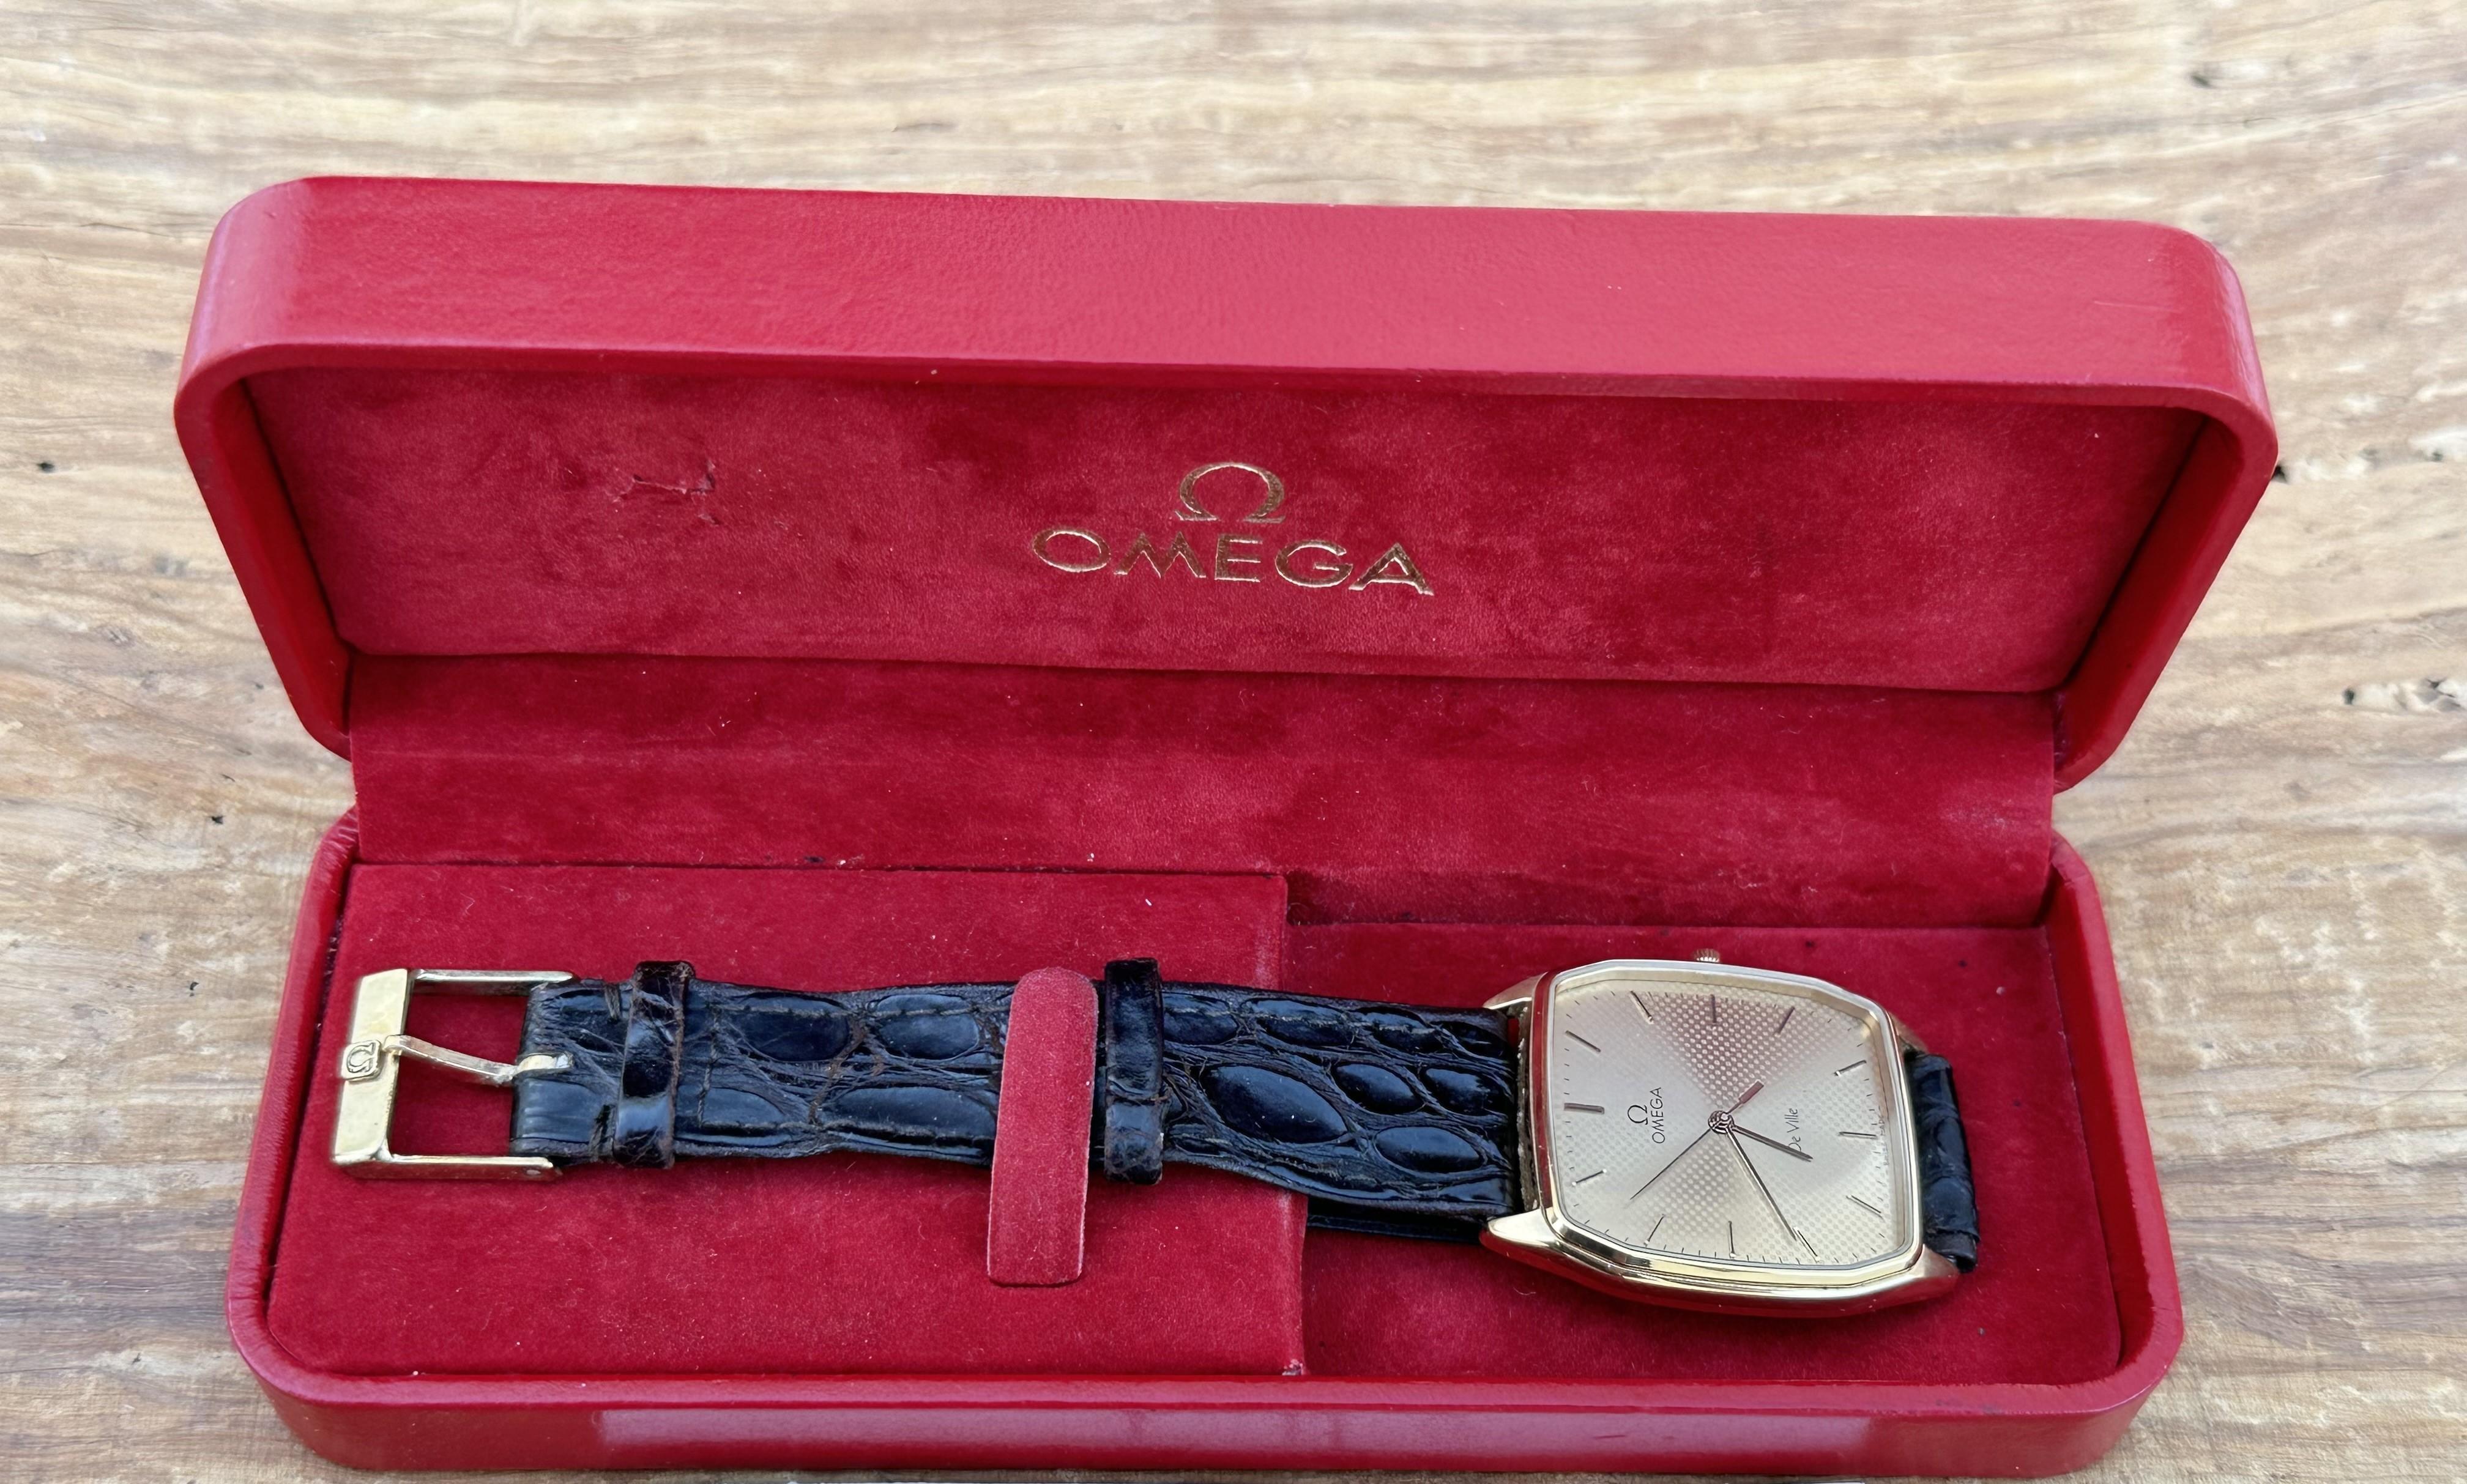 Brand: Omega

Model: De Ville

Country Of Manufacture: Switzerland

Movement: Quartz 1417

Case Material: Gold Plated Stainless steel

Measurements : Case width: 30 mm. (without crown)

Band Type : Omega Leather With Signed Buckle

Band Condition :